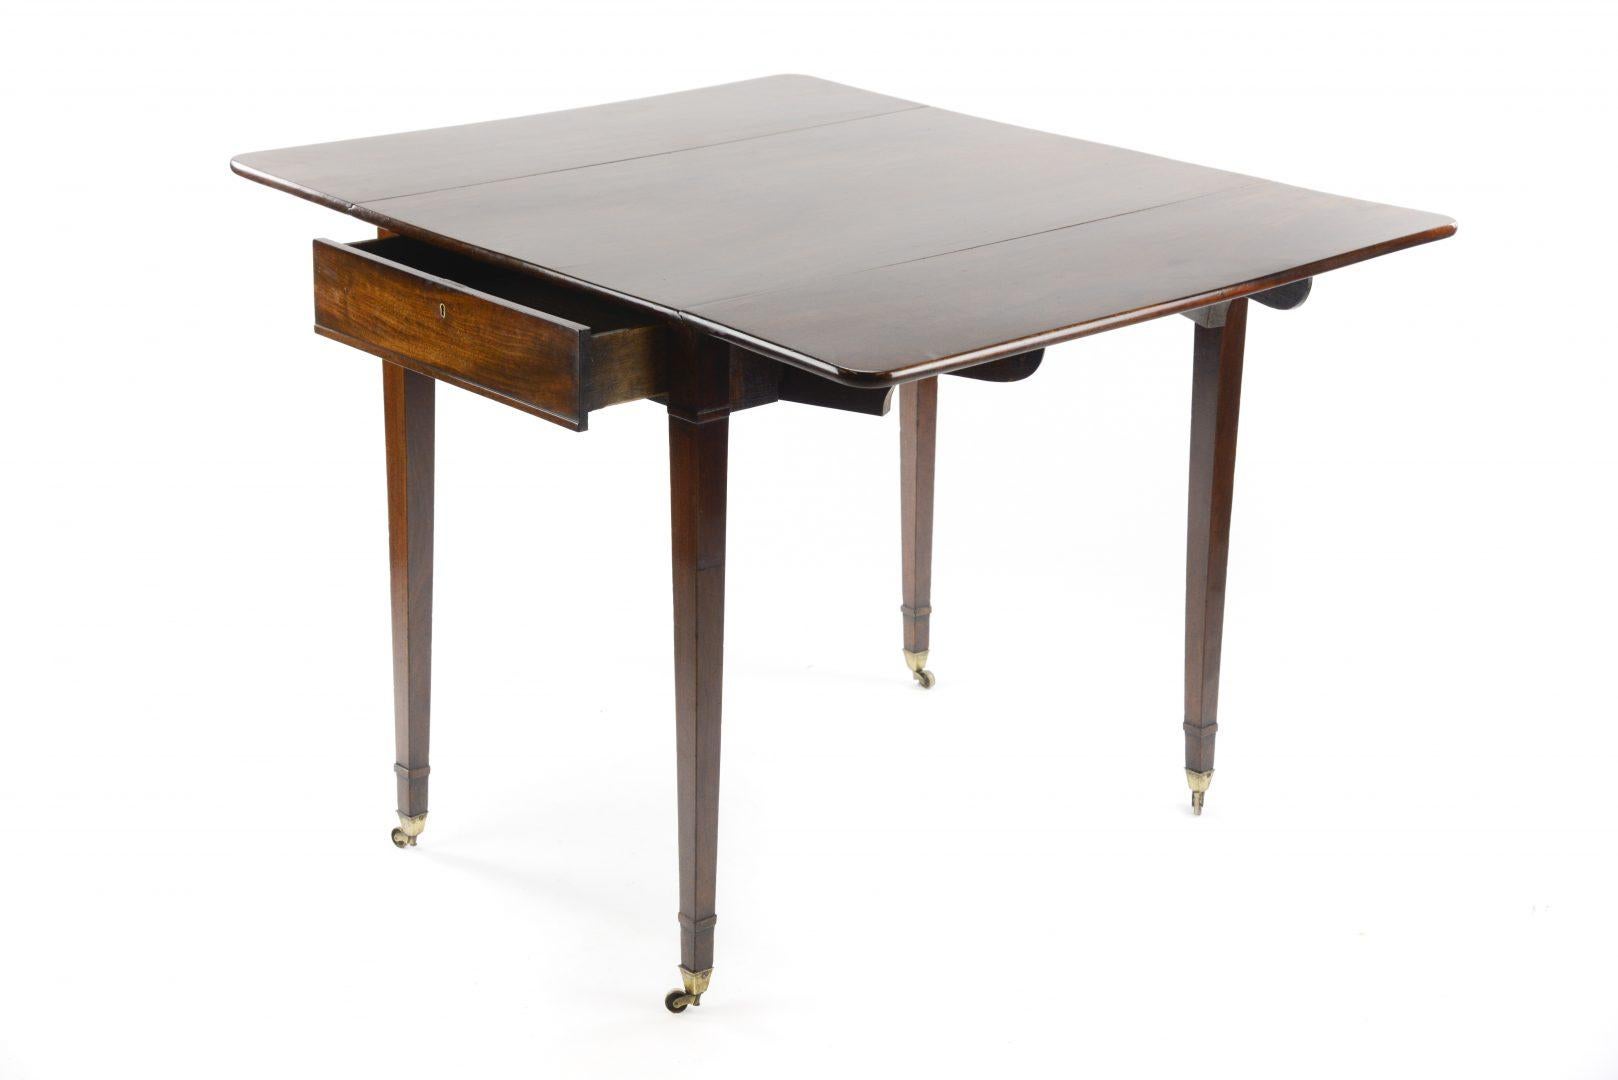 A George IV mahogany Pembroke table by Gillows, with plain top, fitted one frieze drawer, on turned and reeded legs and castors, (signed to the drawer).

Gillows of Lancaster and London, also known as Gillow & Co., was an English furniture making